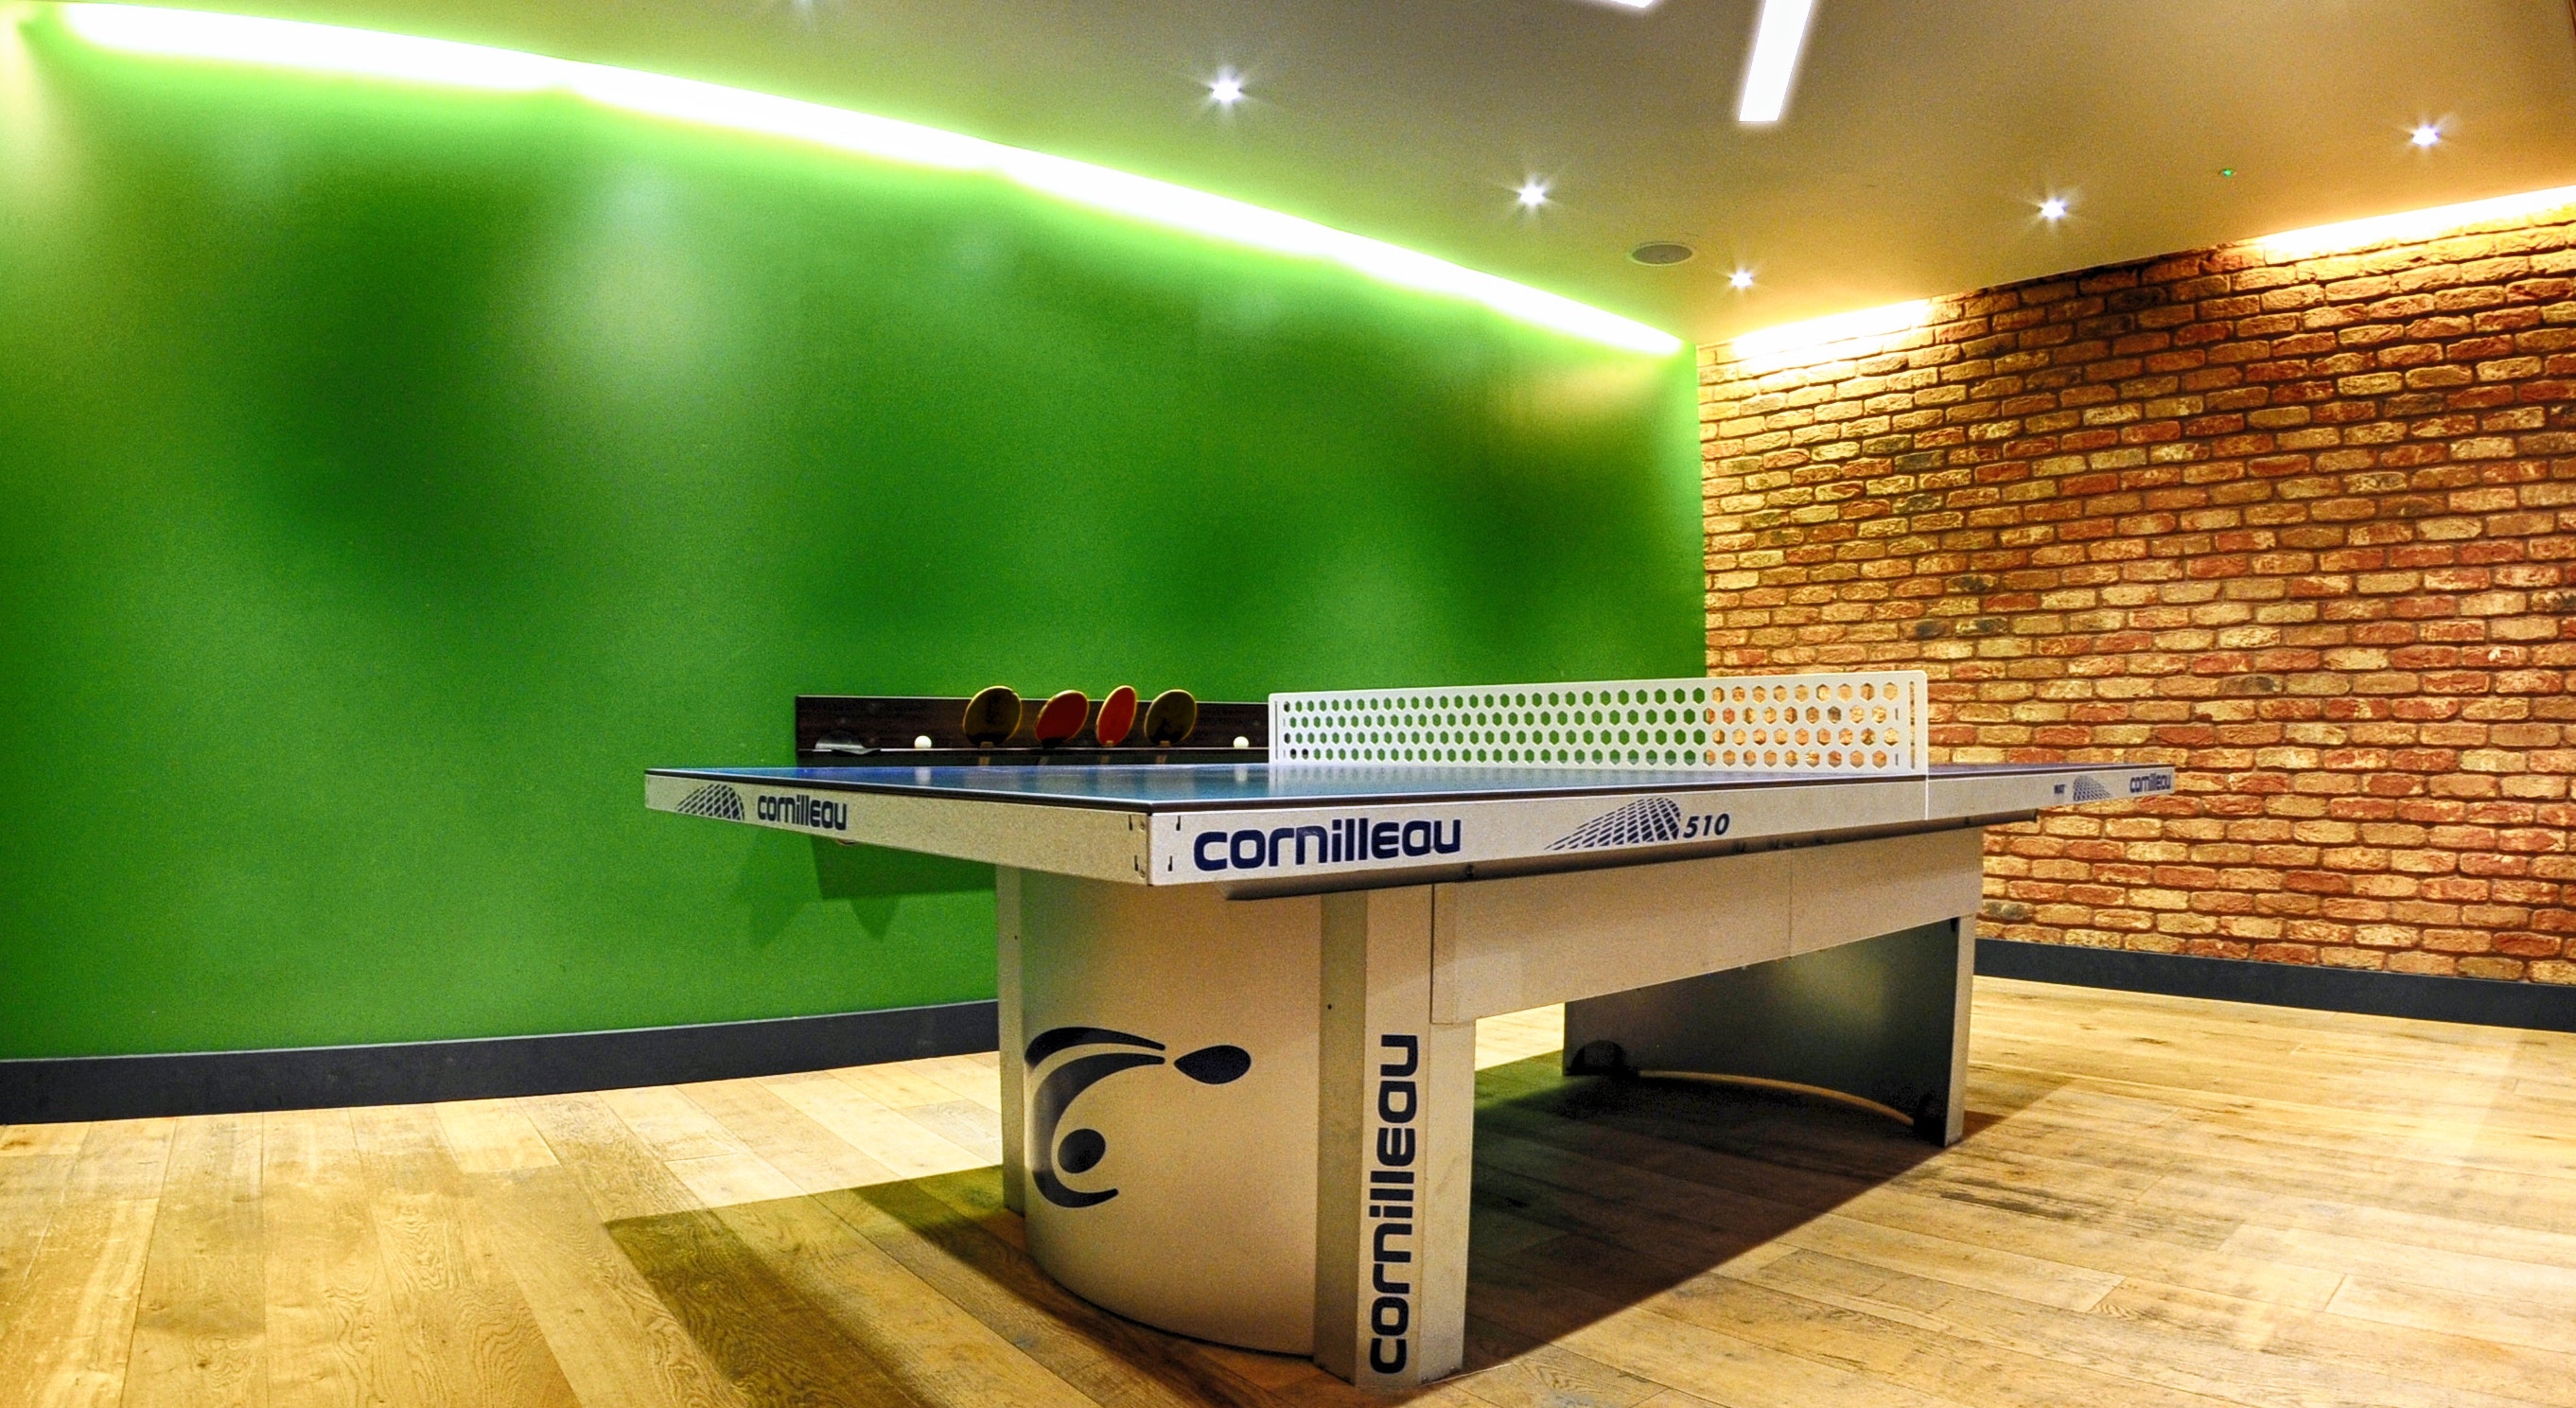 Do Ping-Pong and Paint Make Workplaces More Creative?